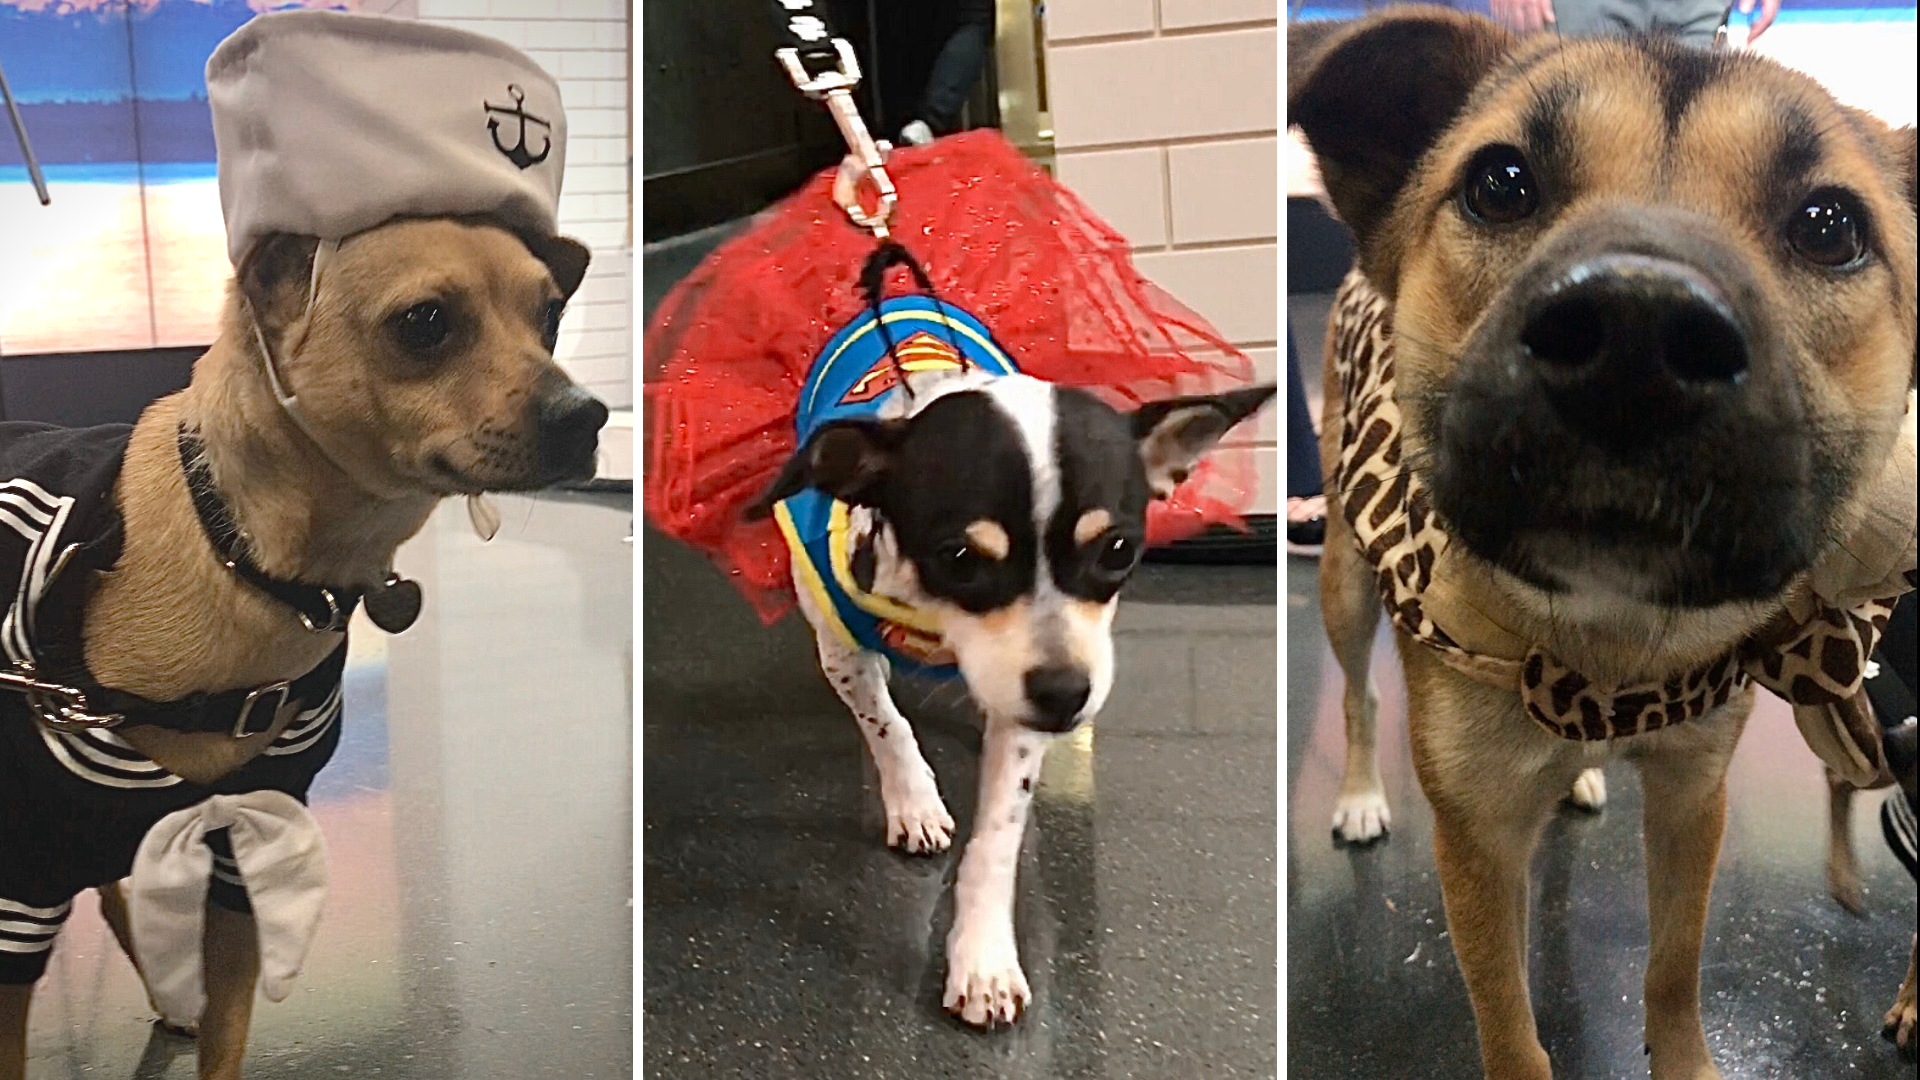 Adorable and adoptable dogs from the Northwest Canine Coalition show off their best do-it-yourself and off-the-shelf costumes and Preventive Vet shows us how to DIY.